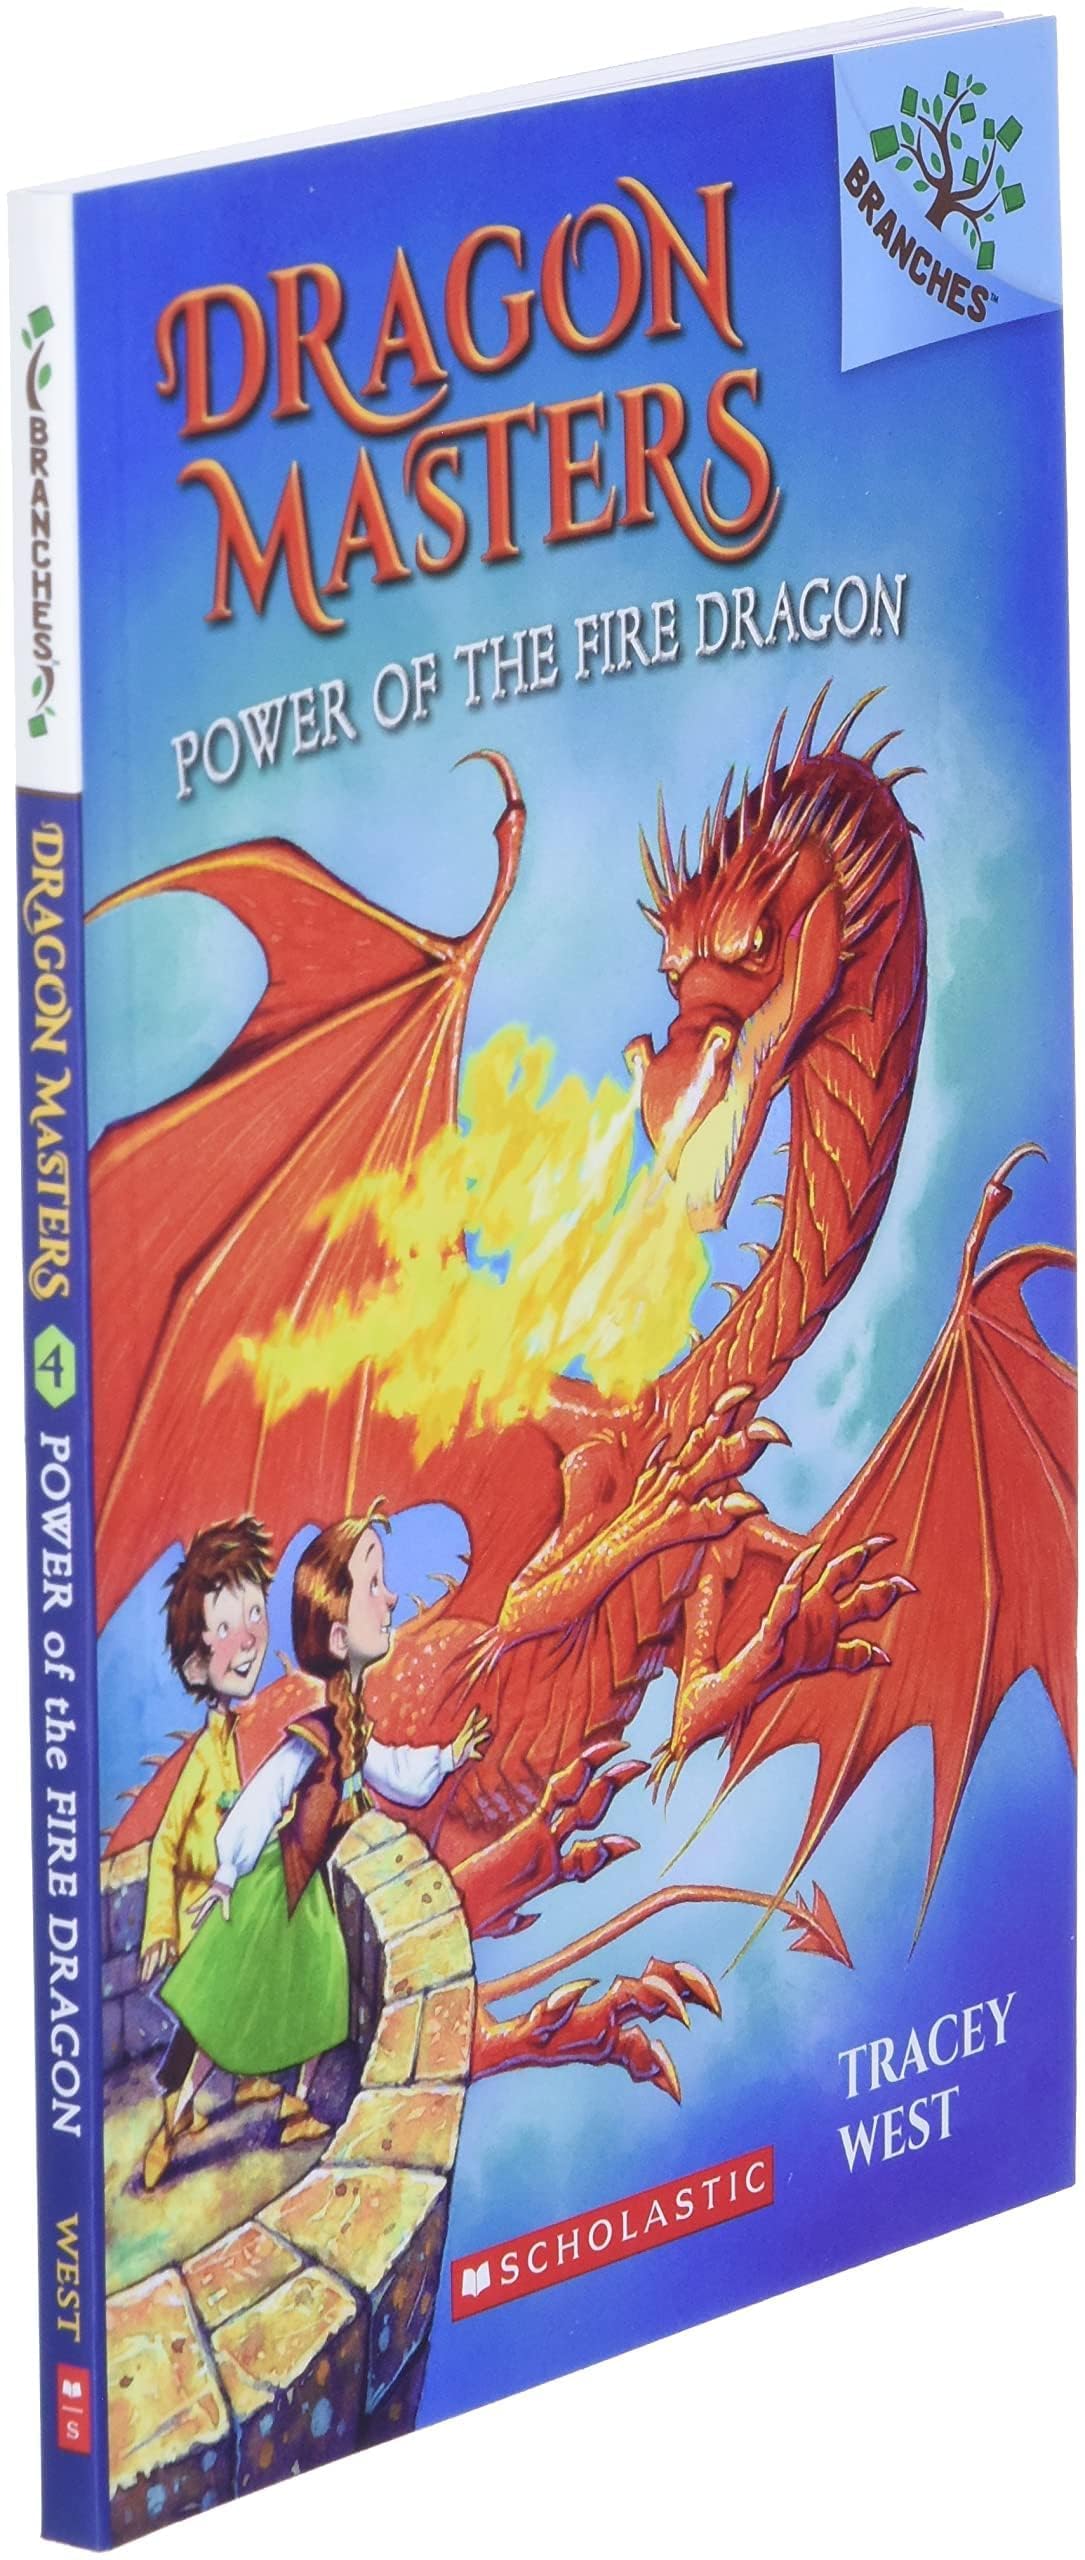 Power of the Fire Dragon: A Branches Book (Dragon Masters 4): Volume 4 (Dragon Masters)